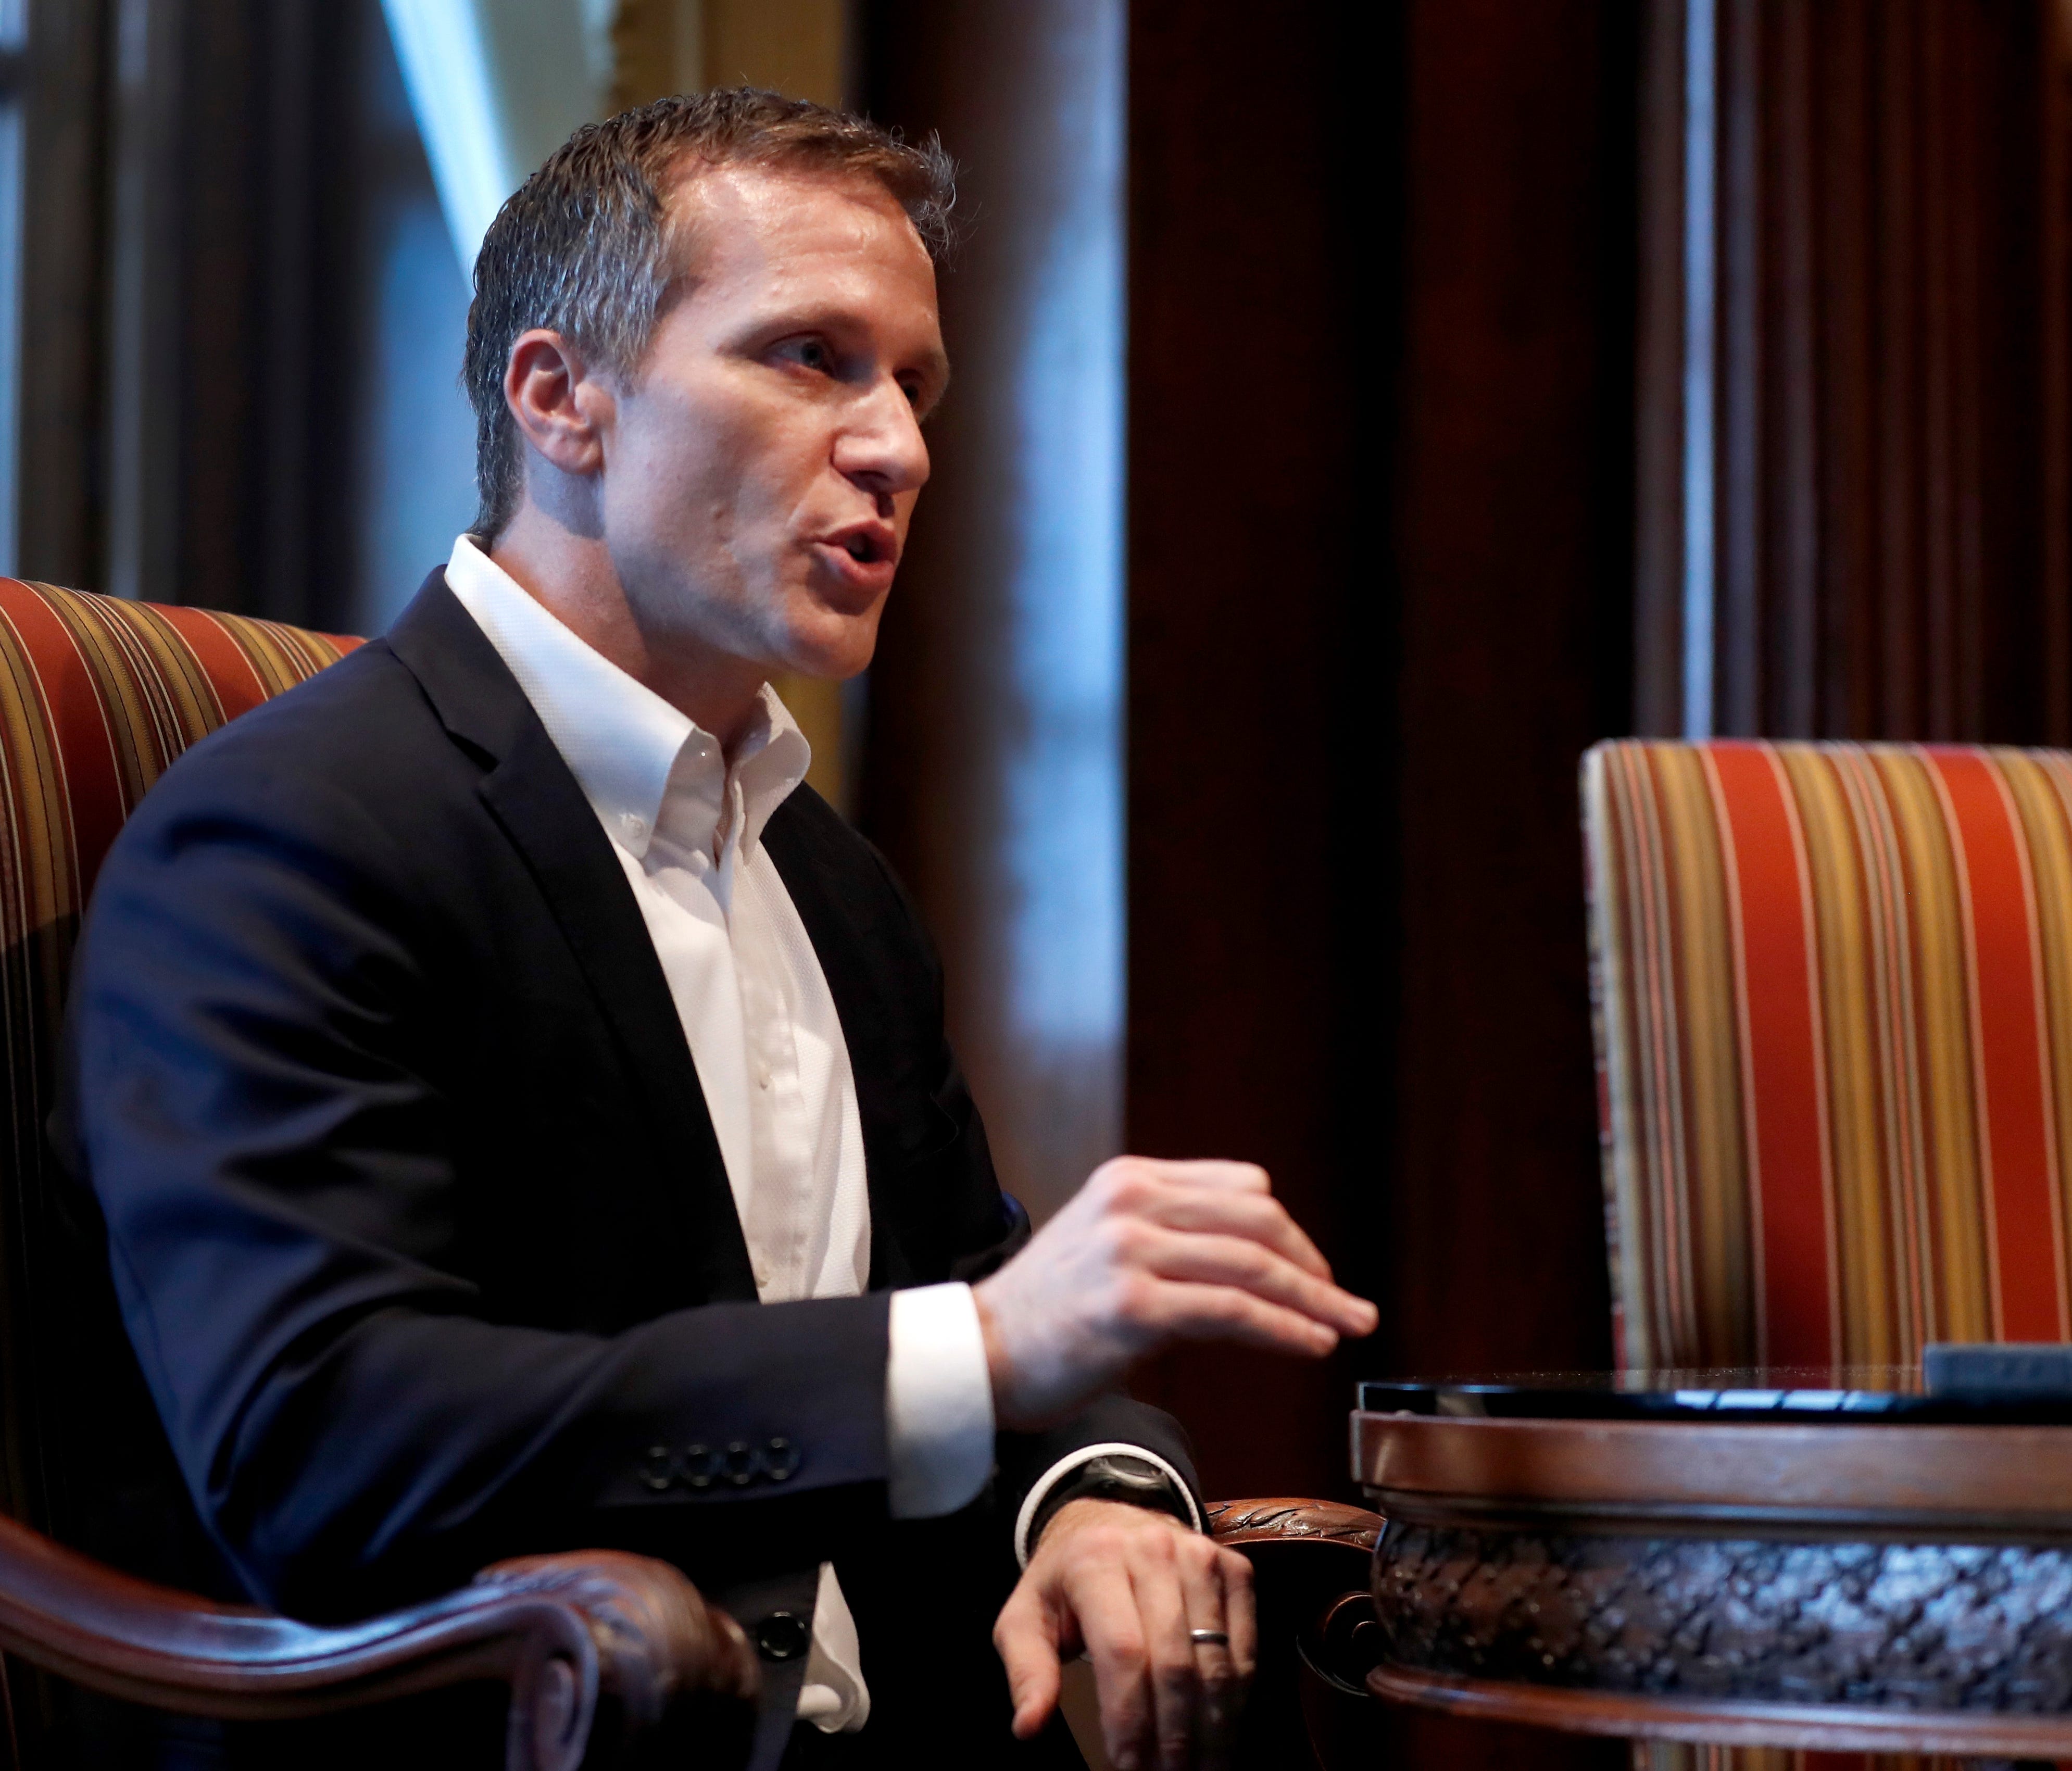 Missouri Gov. Eric Greitens speaks during an interview in his office at the Missouri Capitol Saturday, Jan. 20, 2018, in Jefferson City, Mo. Greitens discussed having an extramarital affair in 2015 before taking office. (AP Photo/Jeff Roberson)